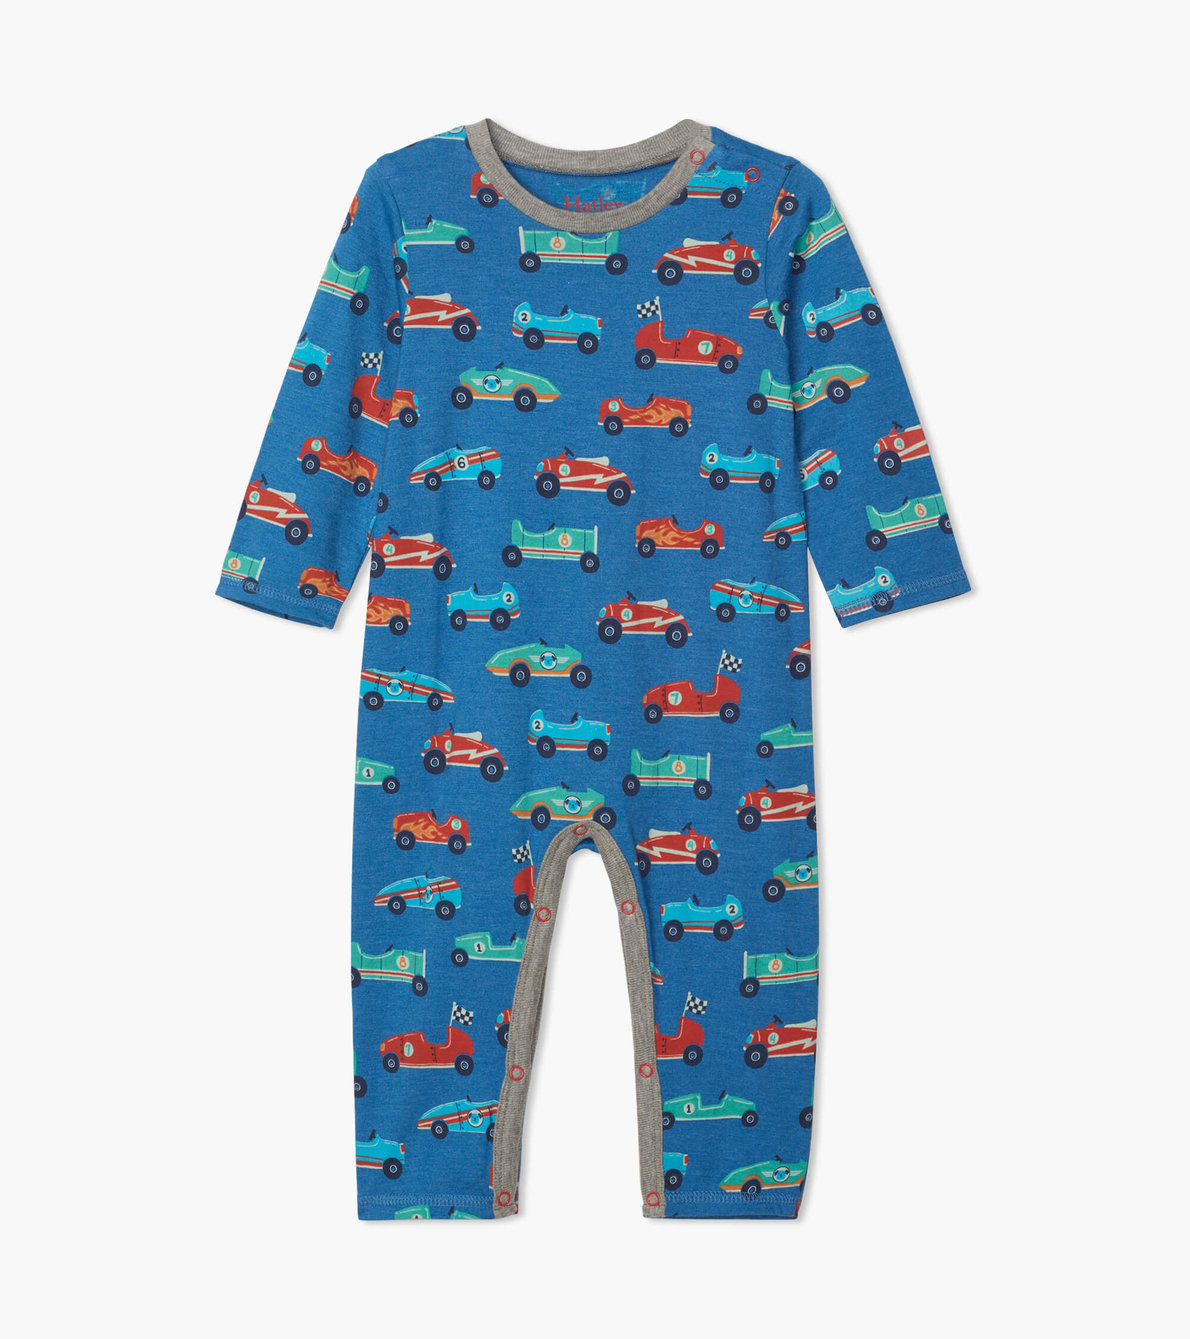 View larger image of Race Cars Baby Romper